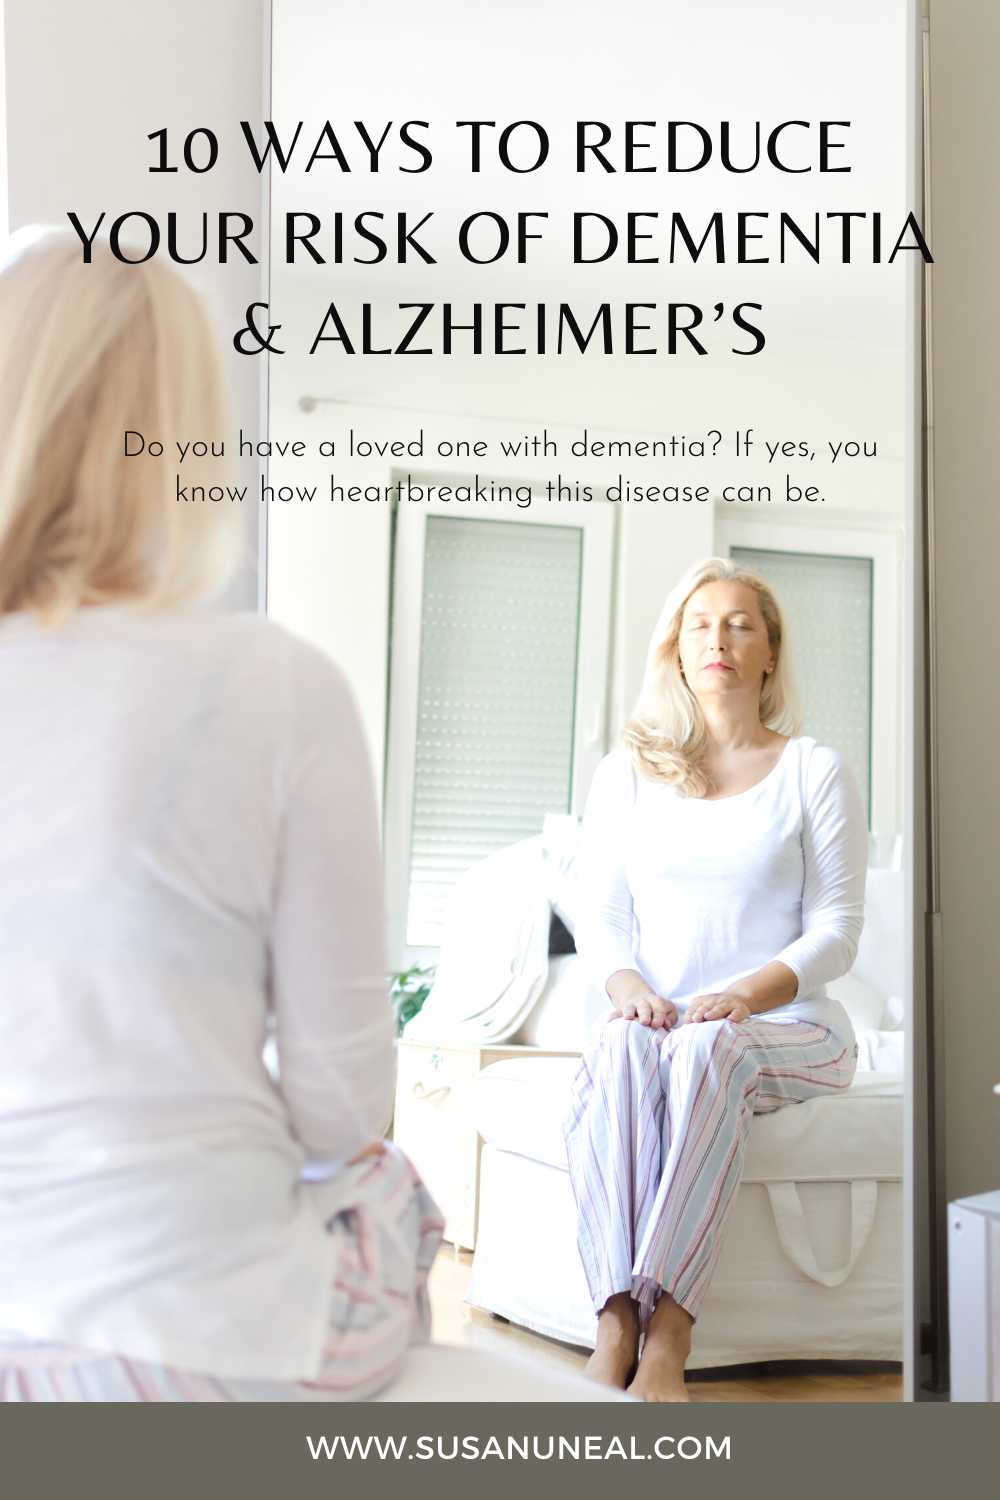 Top 10 Ways to Reduce Your Risk of Dementia & Alzheimer’s